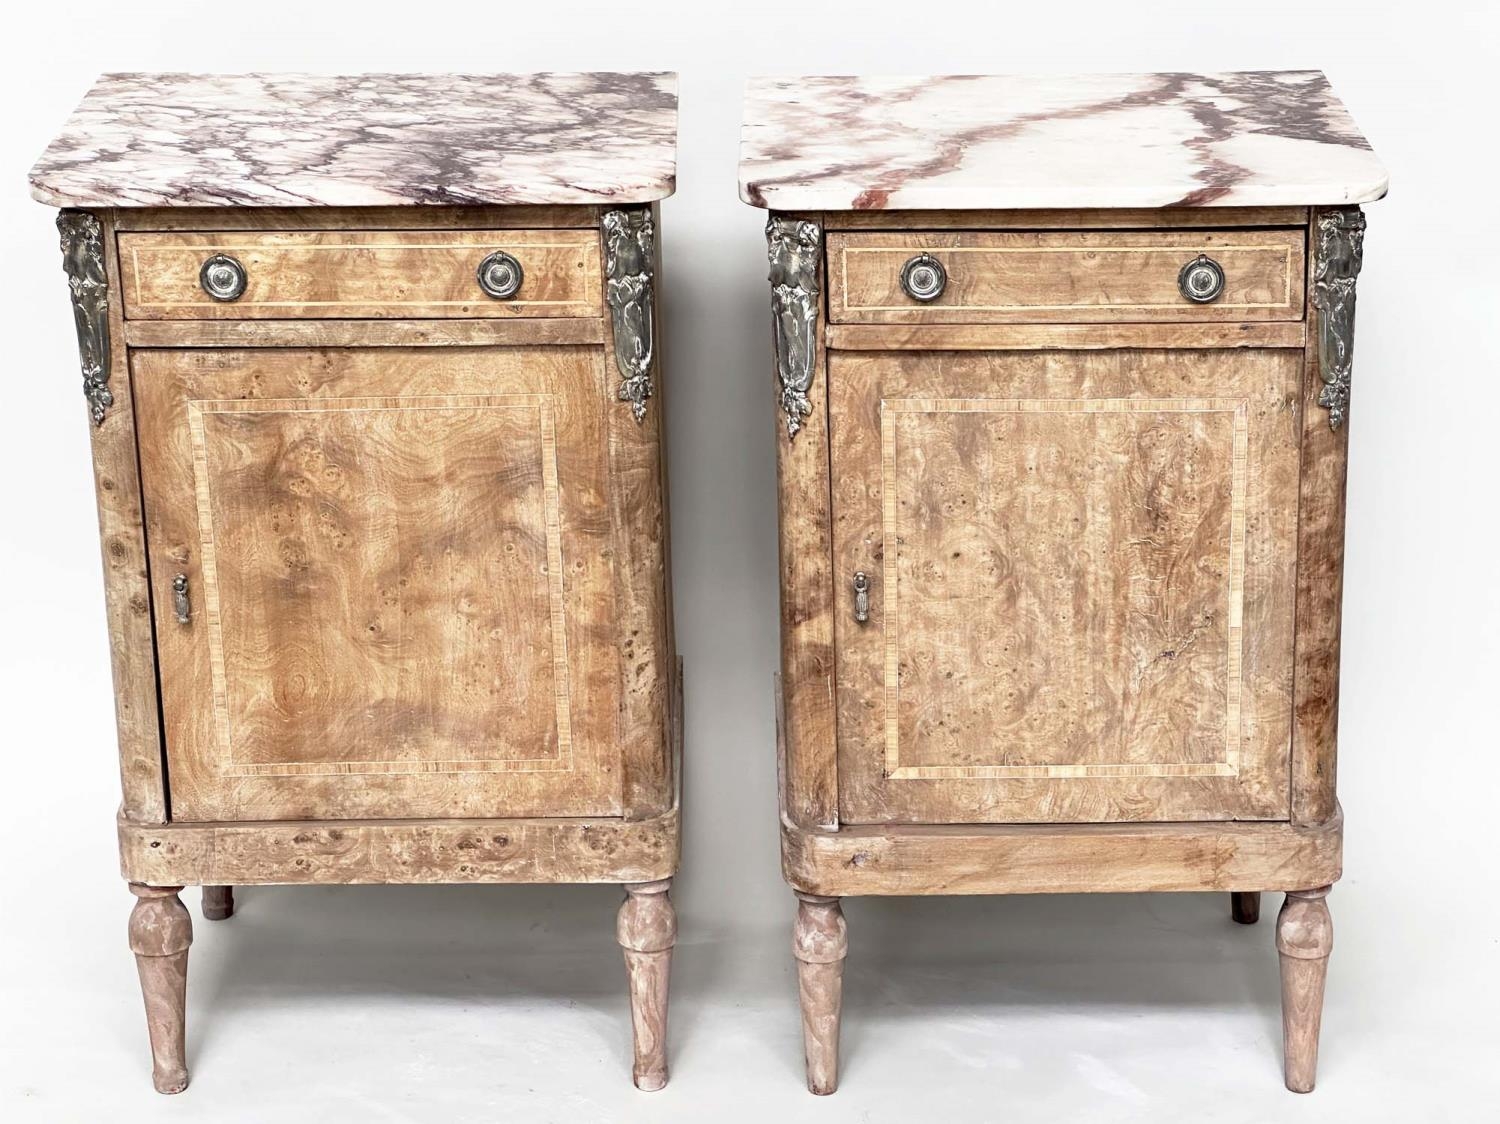 TABLES DE NUIT, a pair, 19th century French walnut and silvered metal mounted each with breche